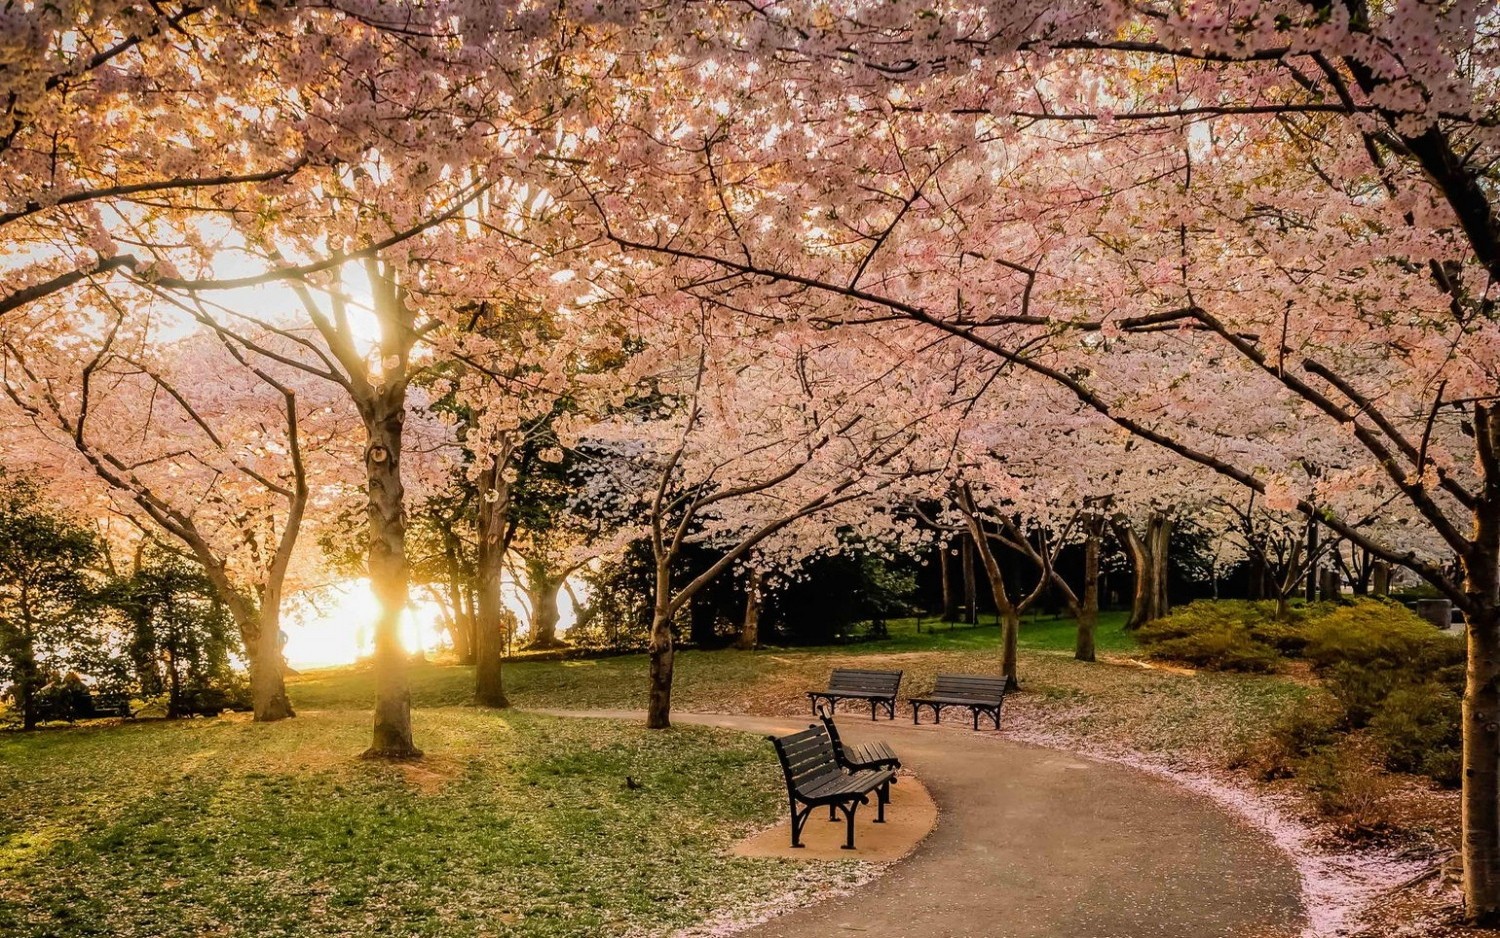 Nature Landscape Park Lawns Bench Trees Sunset Cherry Blossom Flowers Path Pink 1500x938